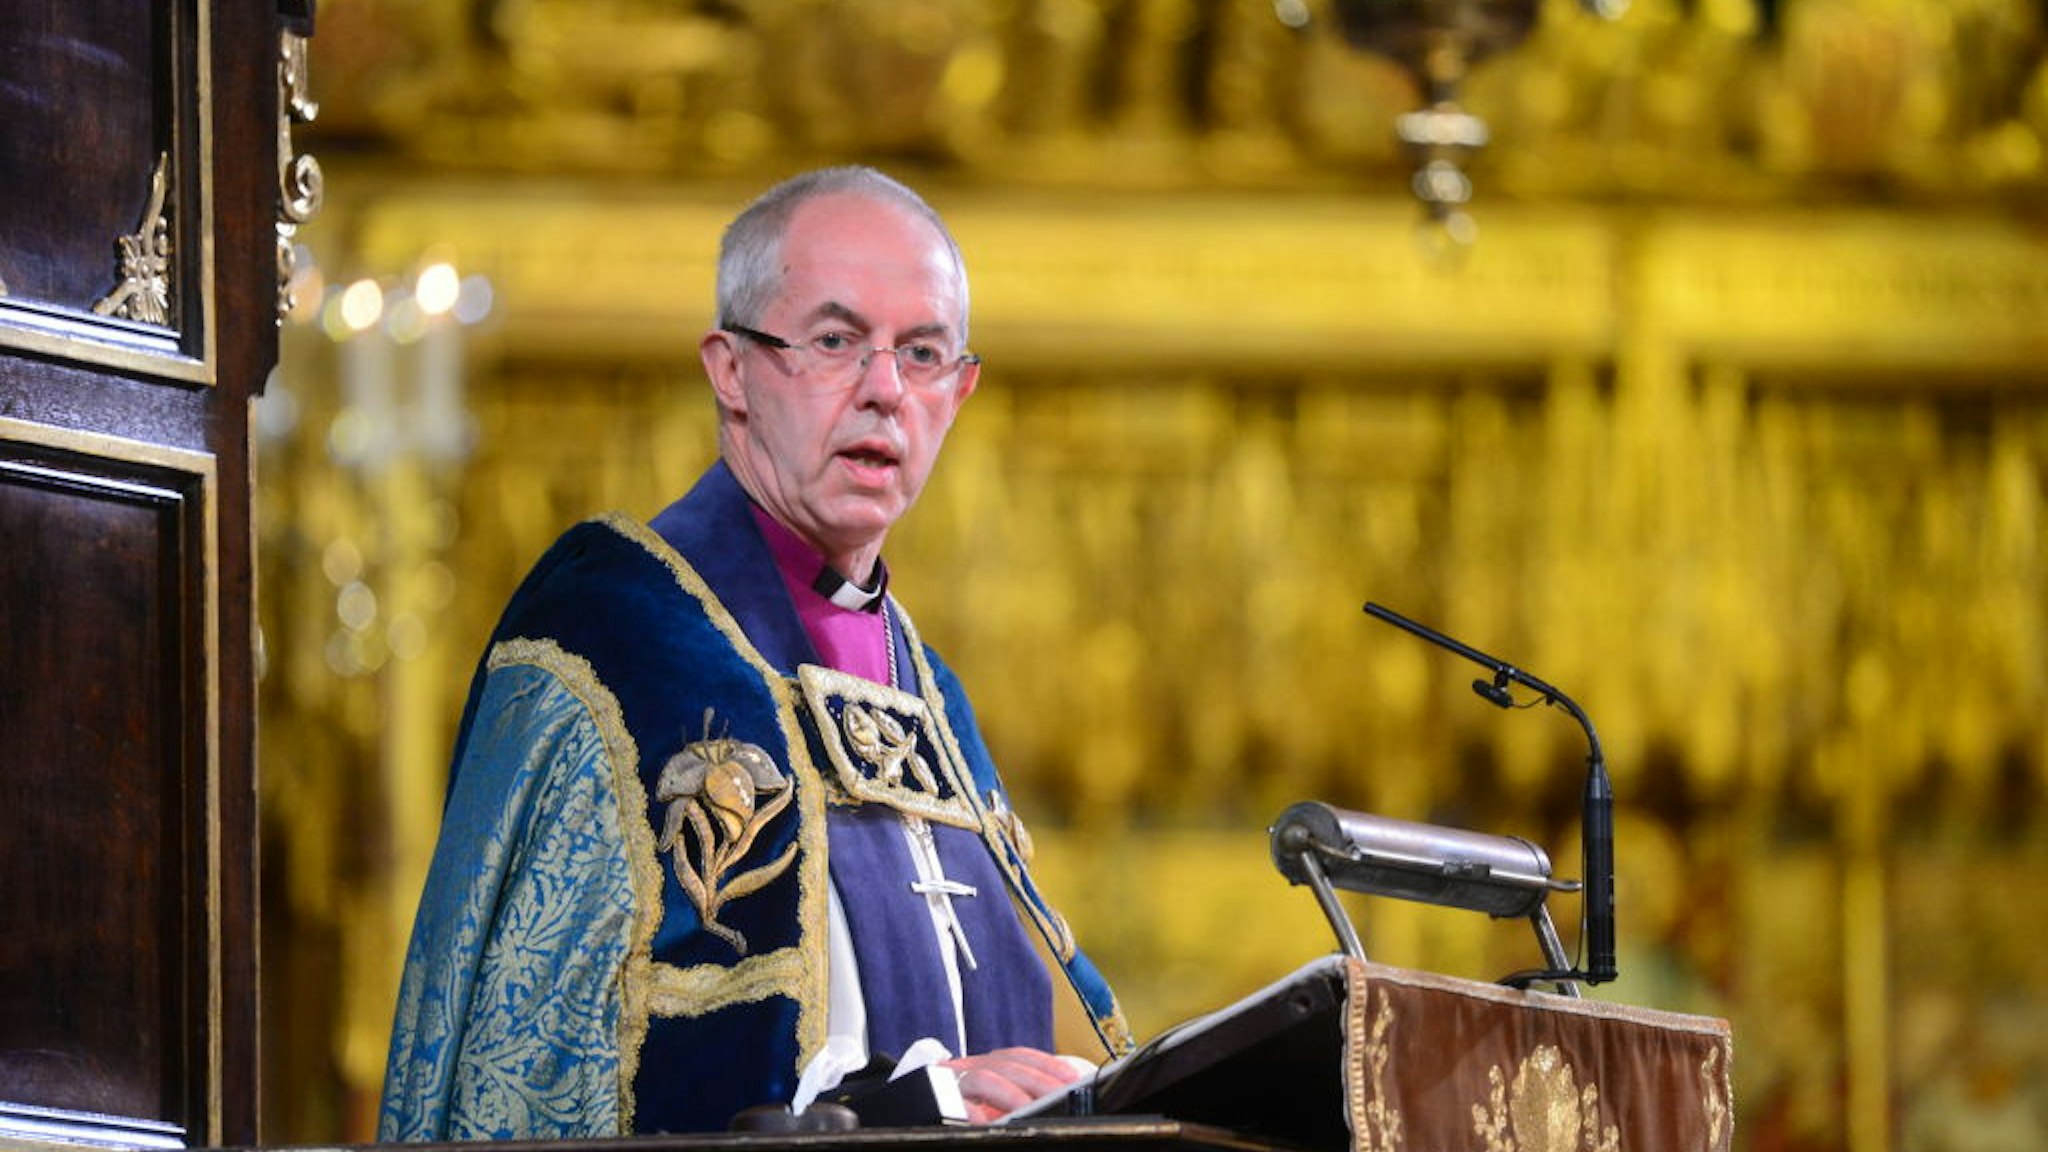 Justin Welby, The Archbishop of Canterbury gives a speech as he attends a service marking the centenary of WW1 armistice at Westminster Abbey on November 11, 2018 in London, England.